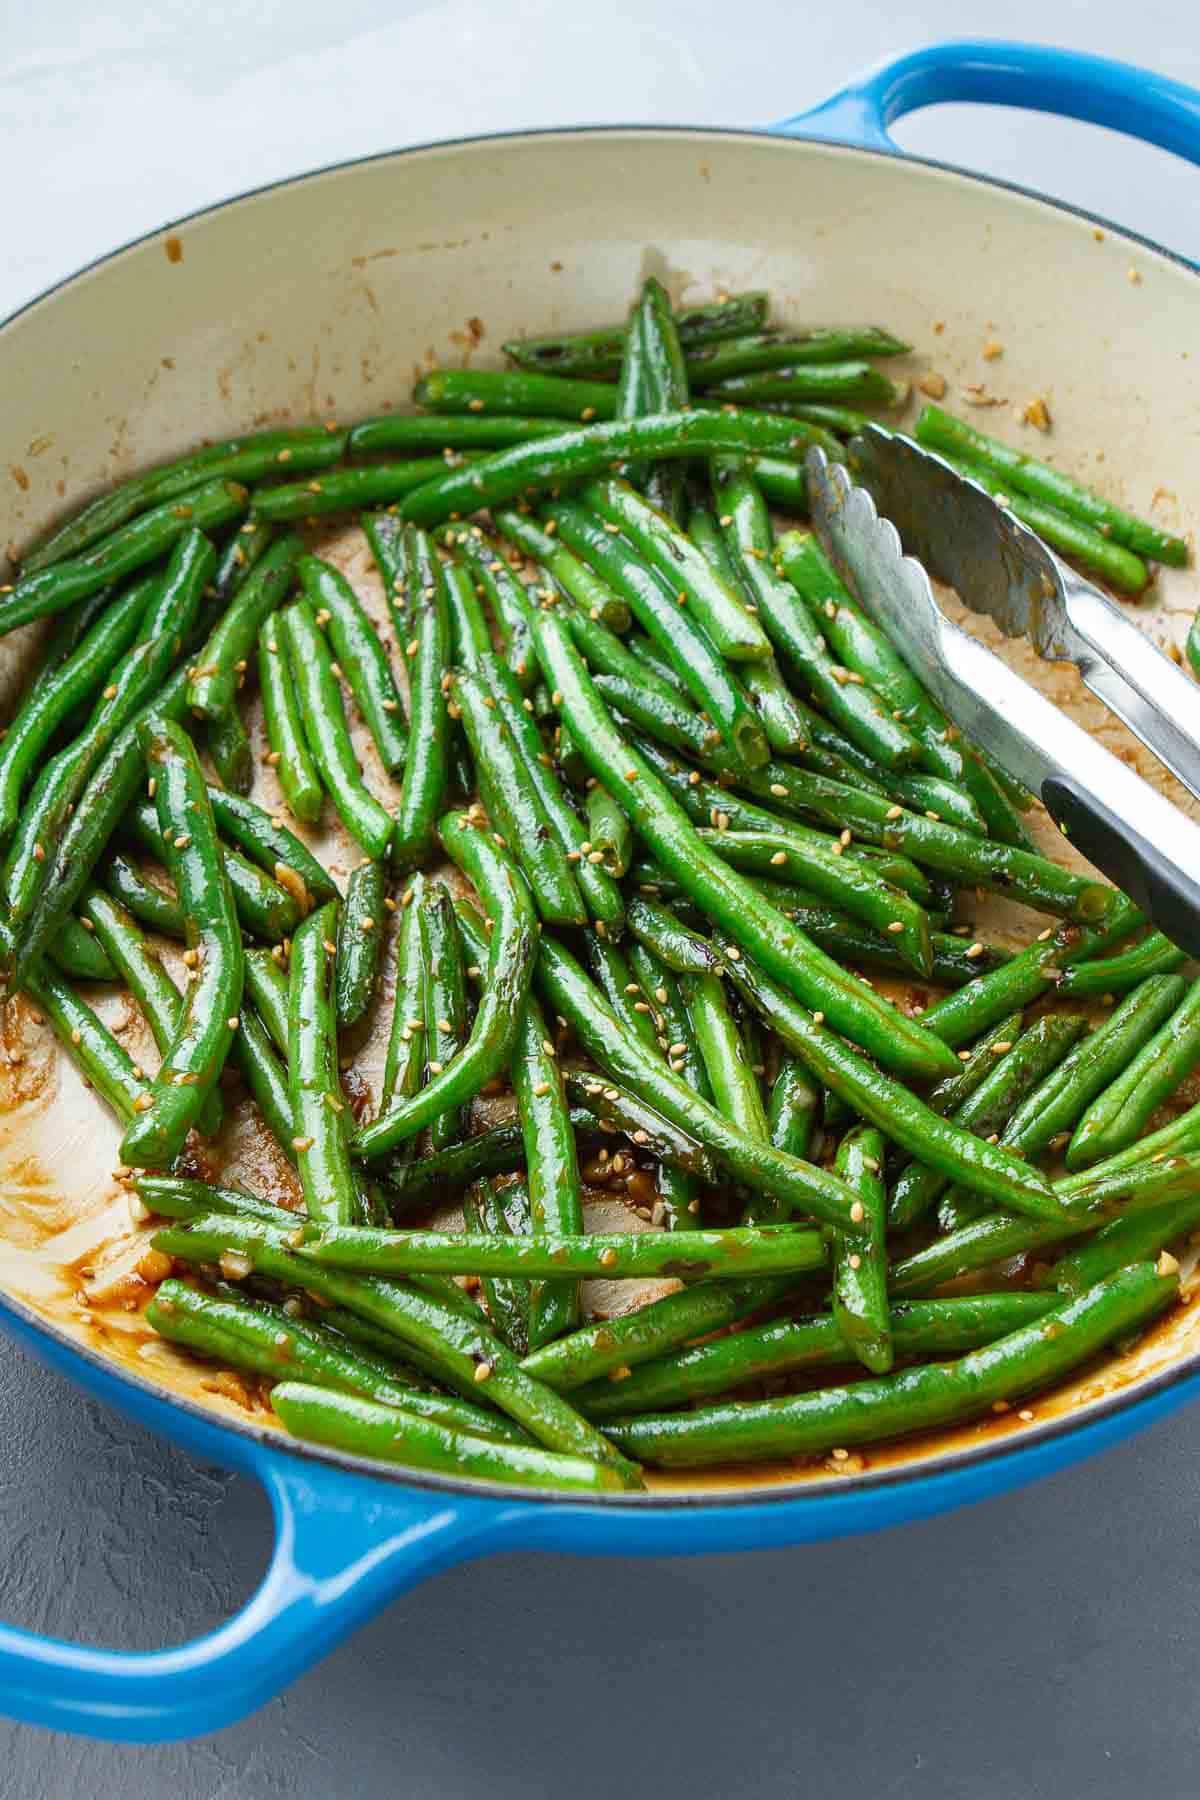 Stir-fried green beans and tongs in a large ceramic skillet.